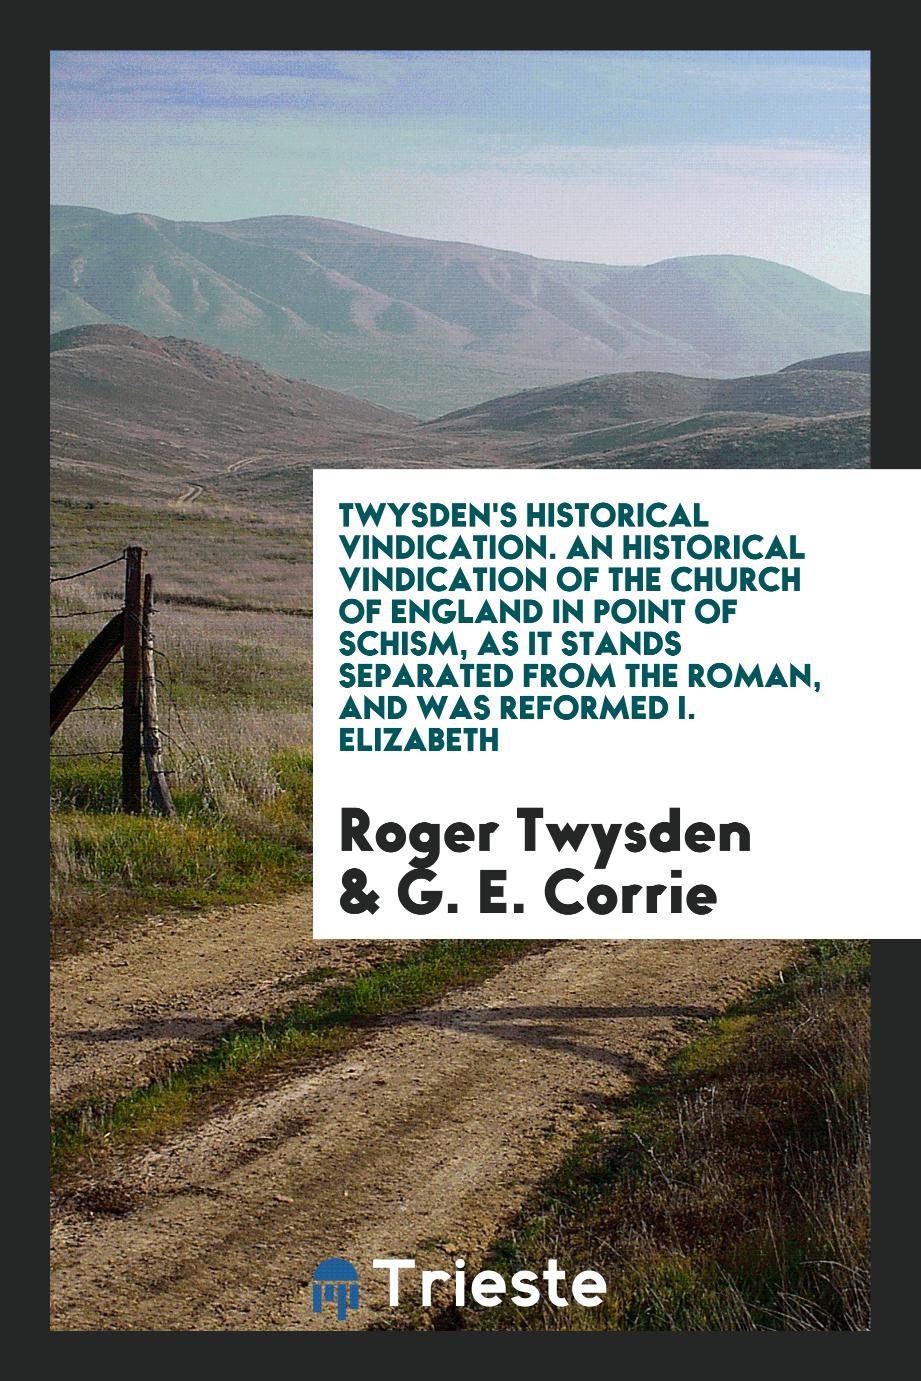 Twysden's Historical Vindication. An Historical Vindication of the Church of England in Point of Schism, as It Stands Separated from the Roman, and Was Reformed I. Elizabeth